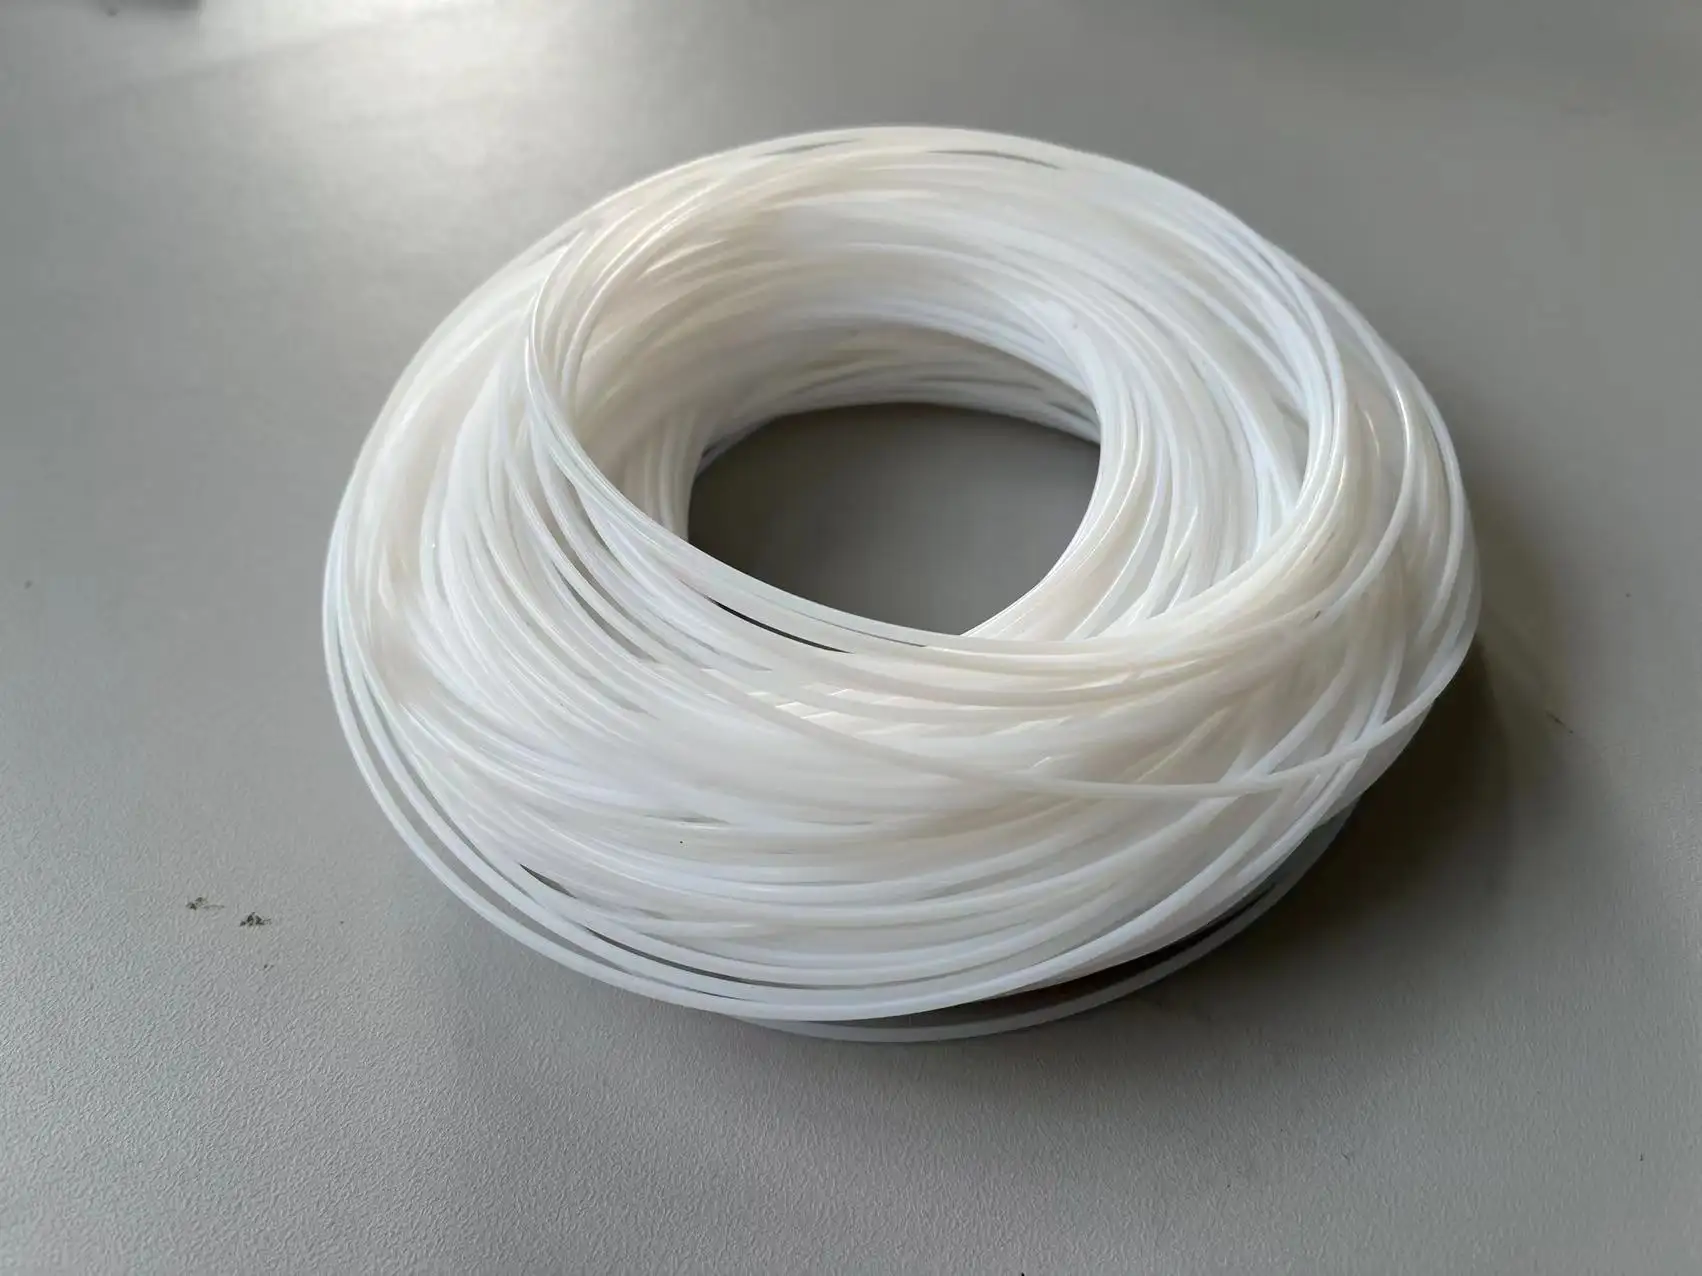 China Fabrik flexible ptfe Schlauch 1,6*0,8*100m ptfe Kunststoff rohr rolle